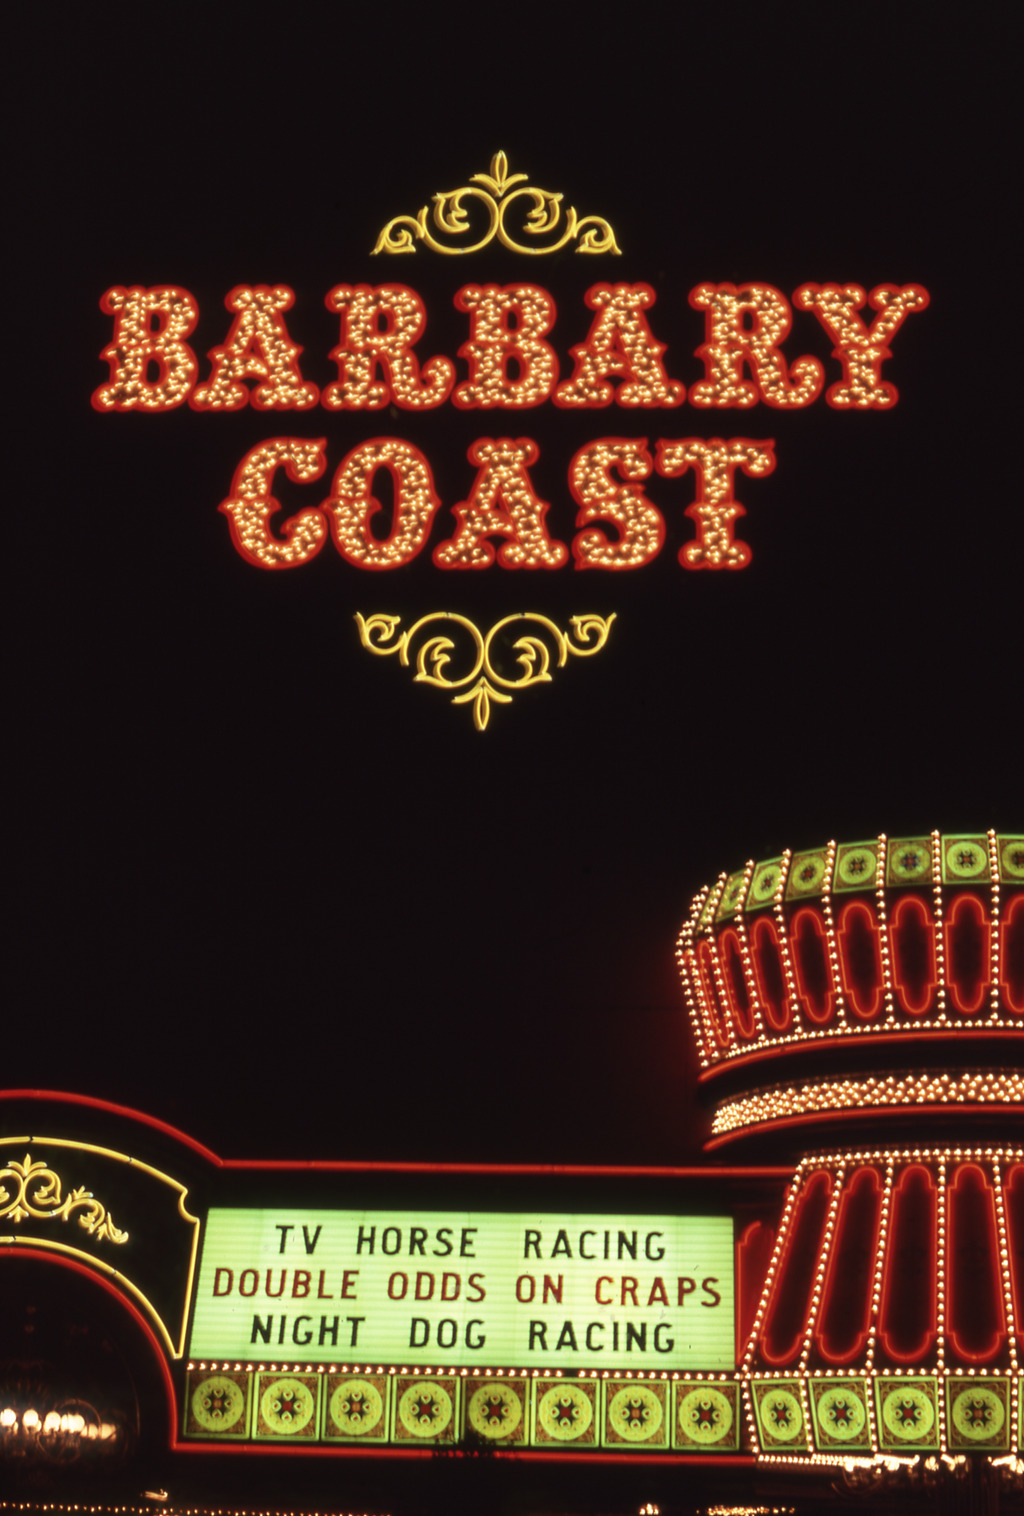 Barbary Coast Hotel lettering, marquee, and wall signs, Las Vegas, Nevada: photographic print